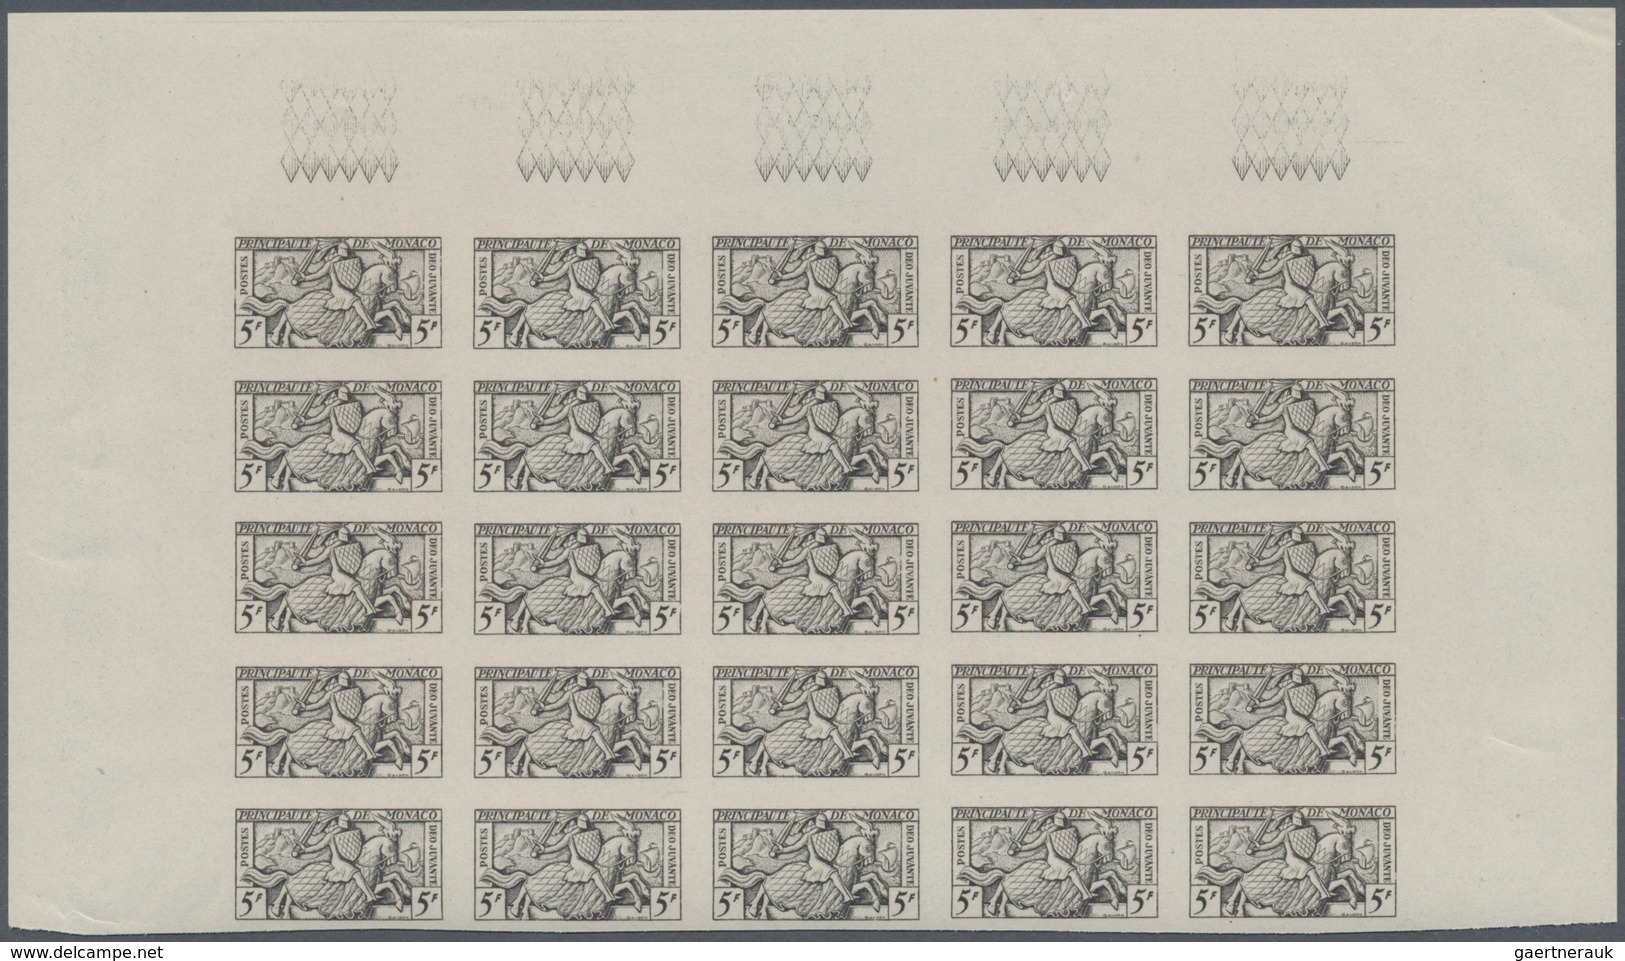 Monaco: 1951, Visiting card stamps complete set of five in IMPERFORATE blocks of 25 from upper margi